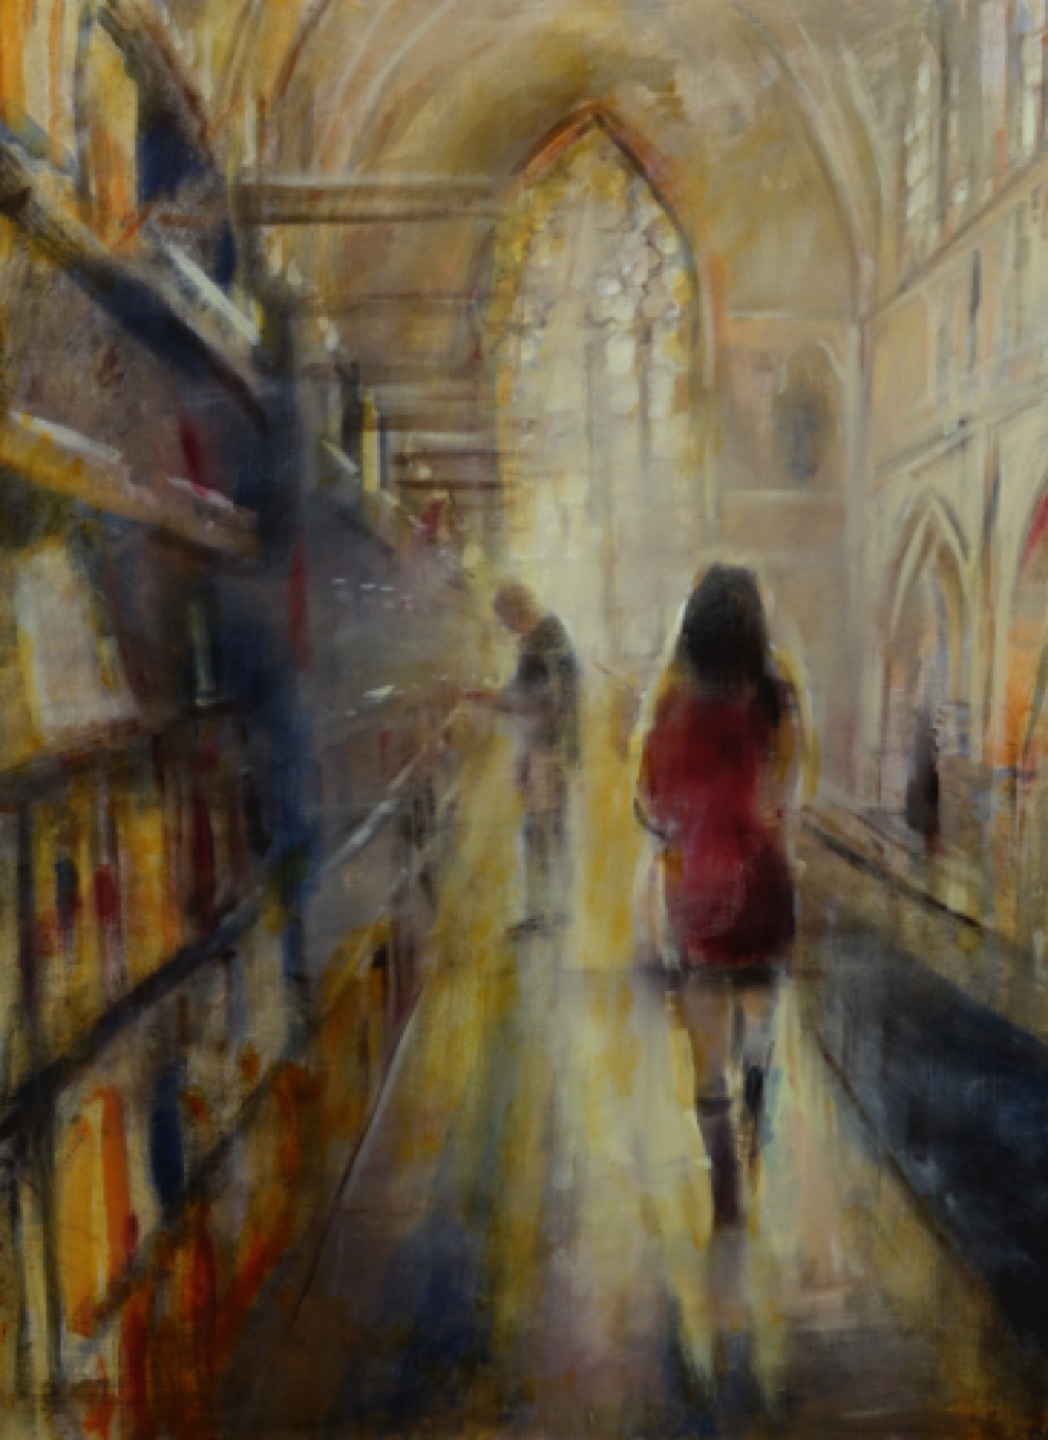 Gregg Chadwick
Die Kathedrale der Bücher (The Cathedral of Books)
48"x36"oil on linen 2013
Private Collection, Long Island, New York